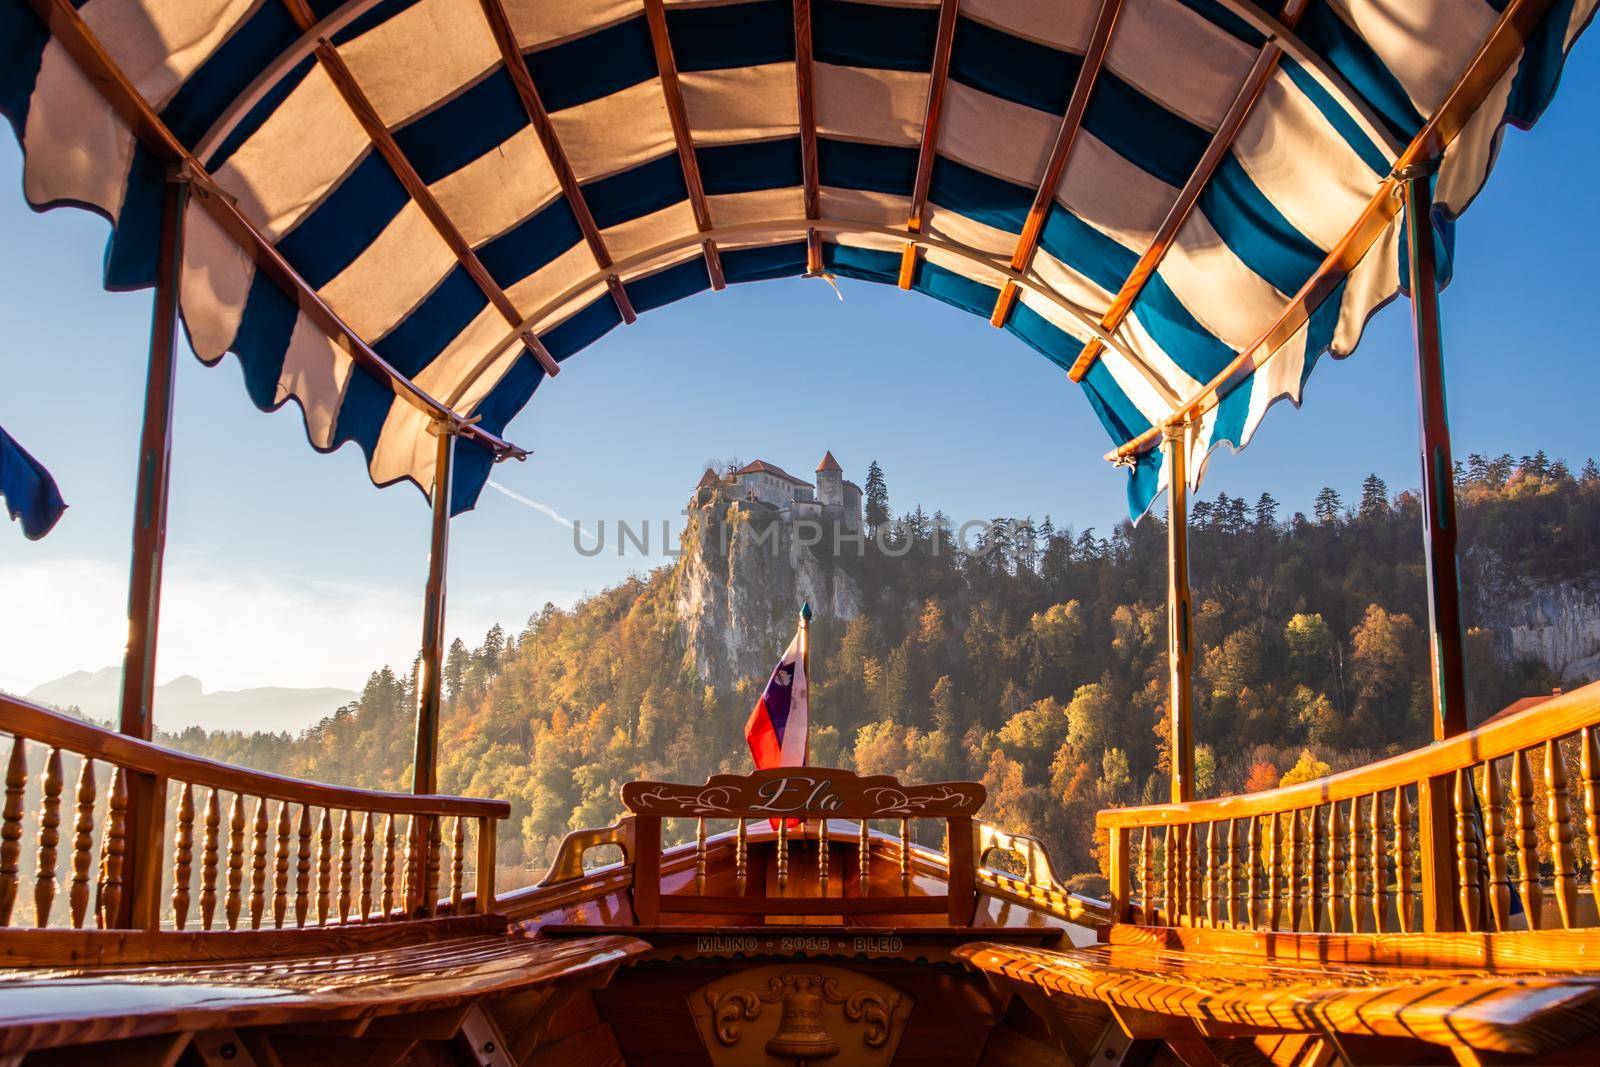 Interior of traditional pletna boat on lake Bled with old castle on the cliff, Bled, Slovenia. by kasto